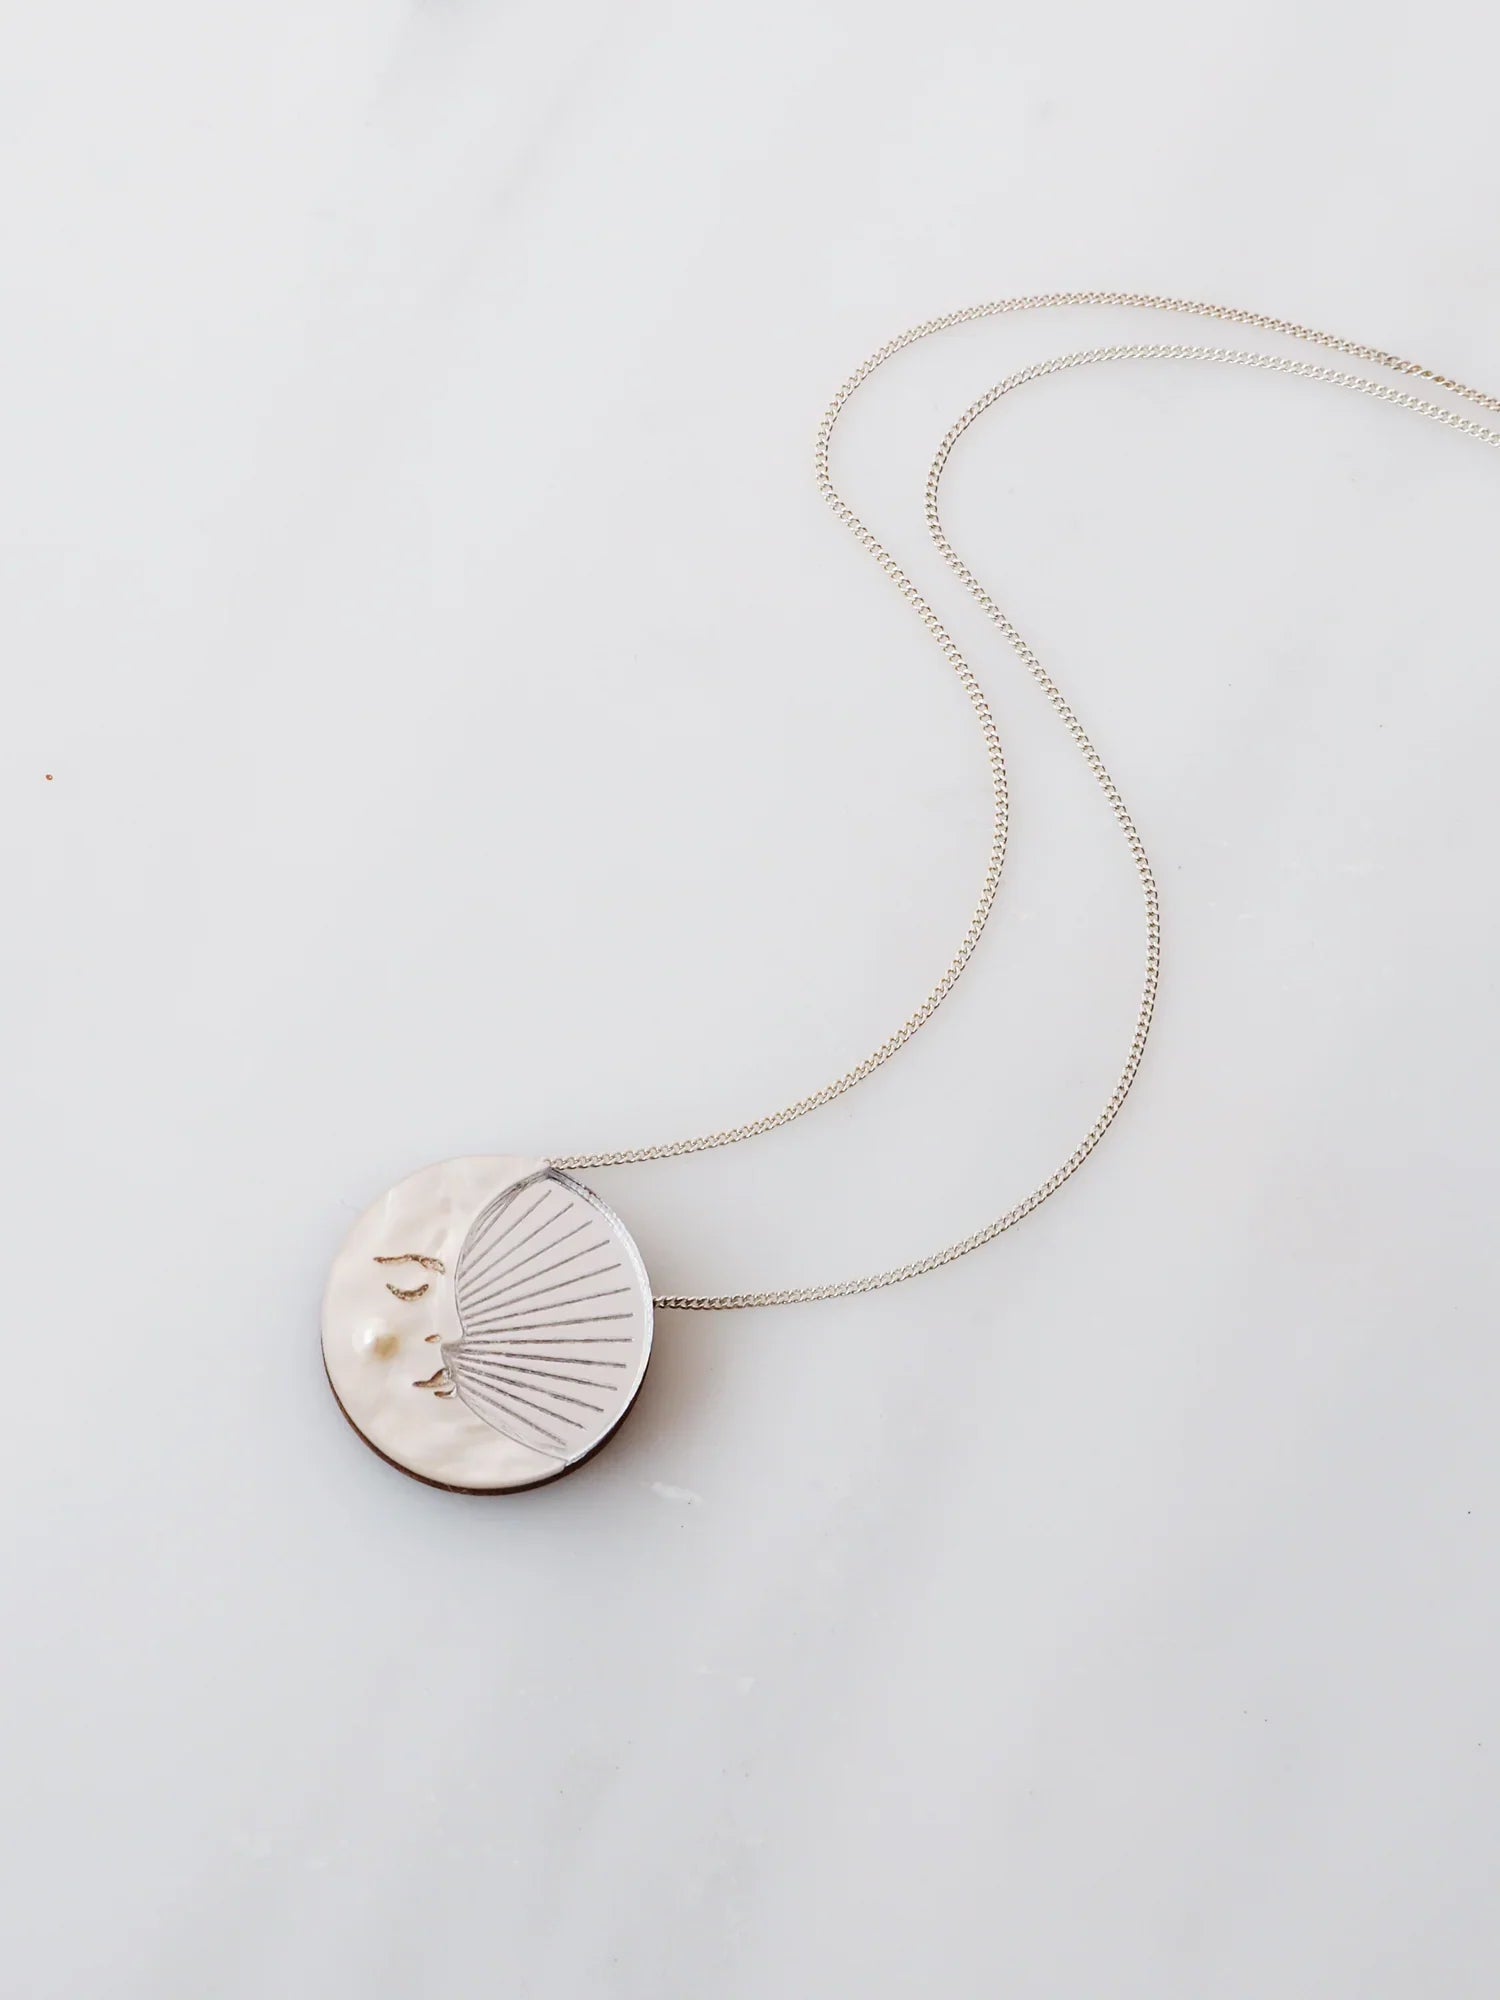 Silver Crescent Moon Necklace by wolf and moon in acrylic on table